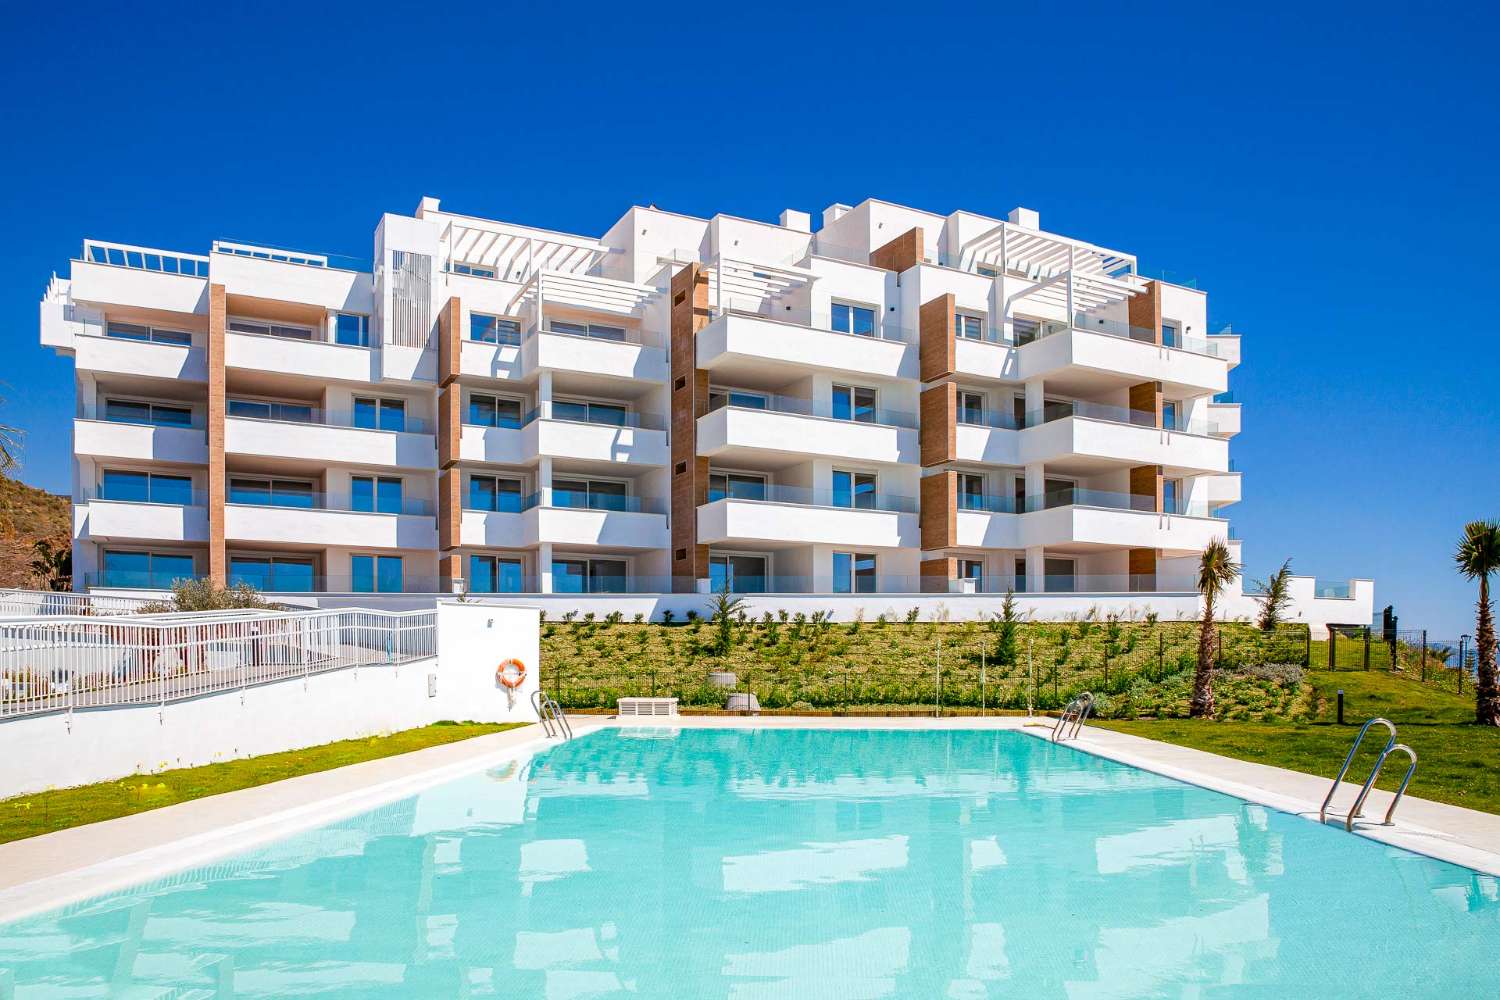 Apartment for sale on torrox coast with beautiful sea views, garage and communal pool